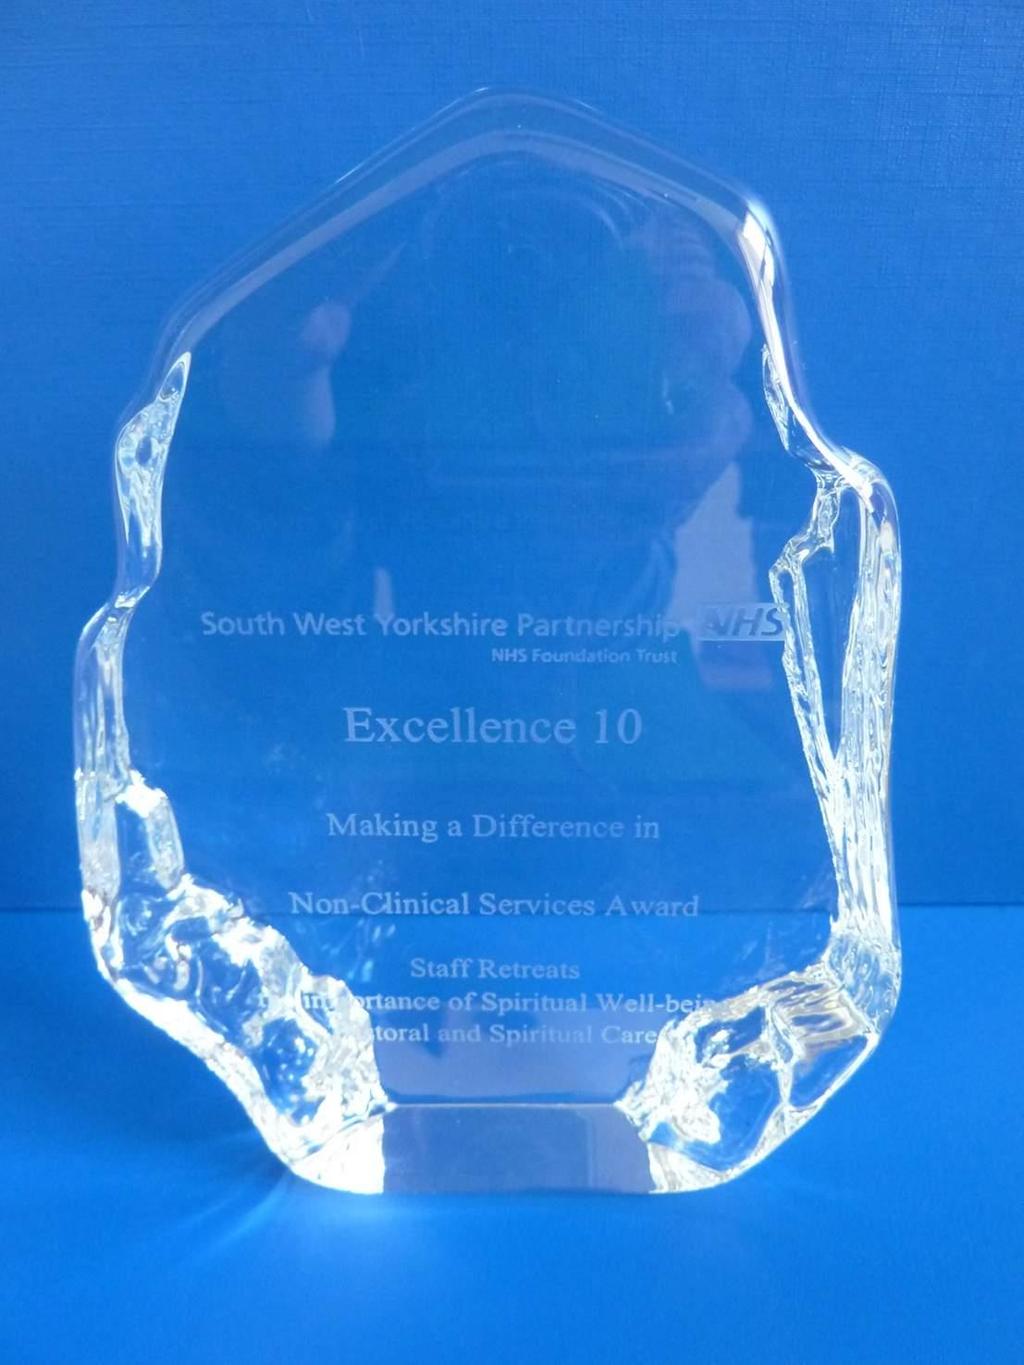 Excellence 2010 Award: Making a Difference in nonclinical services for Staff